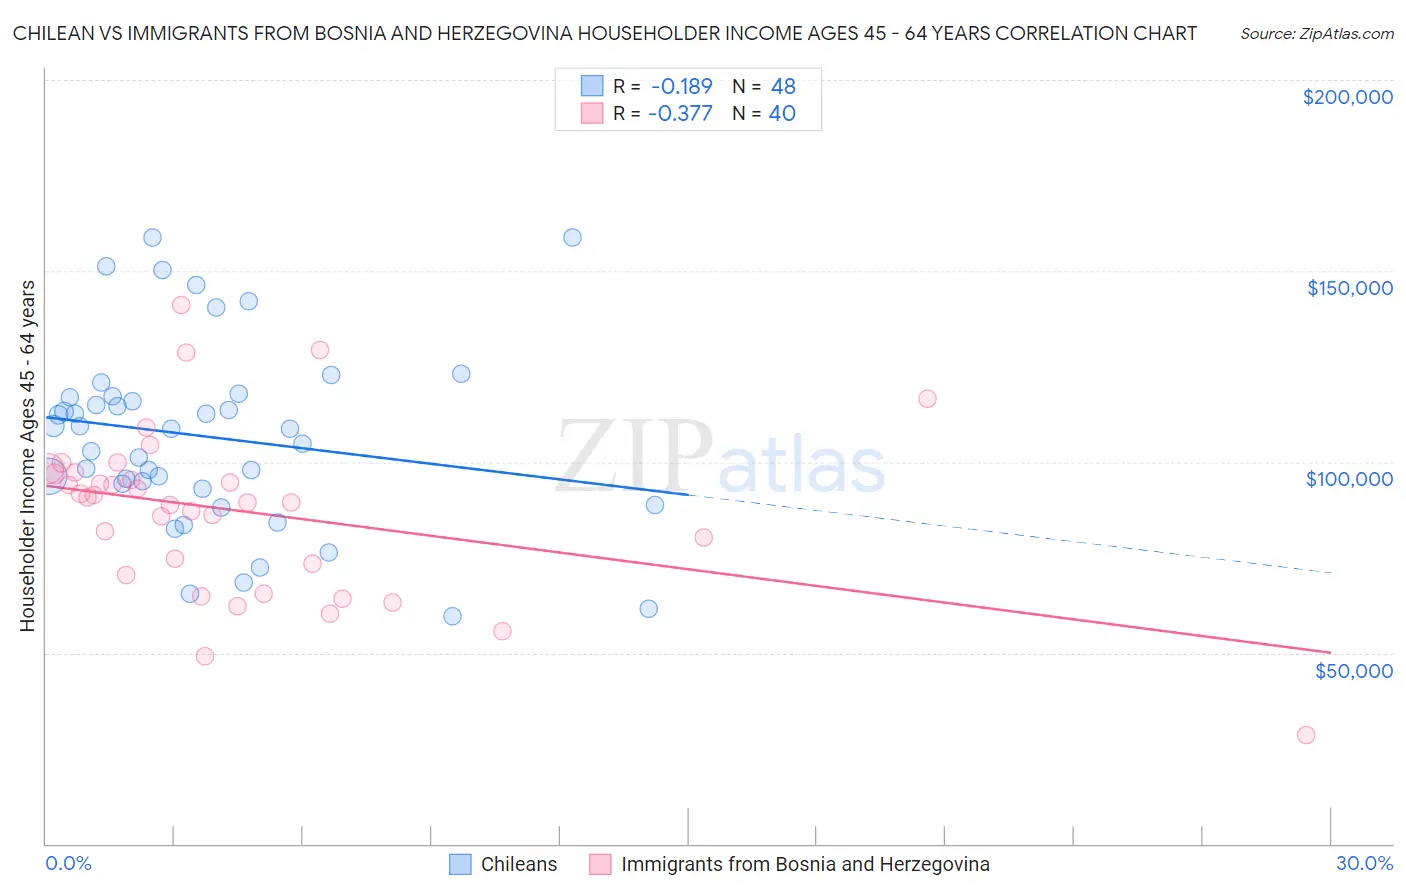 Chilean vs Immigrants from Bosnia and Herzegovina Householder Income Ages 45 - 64 years